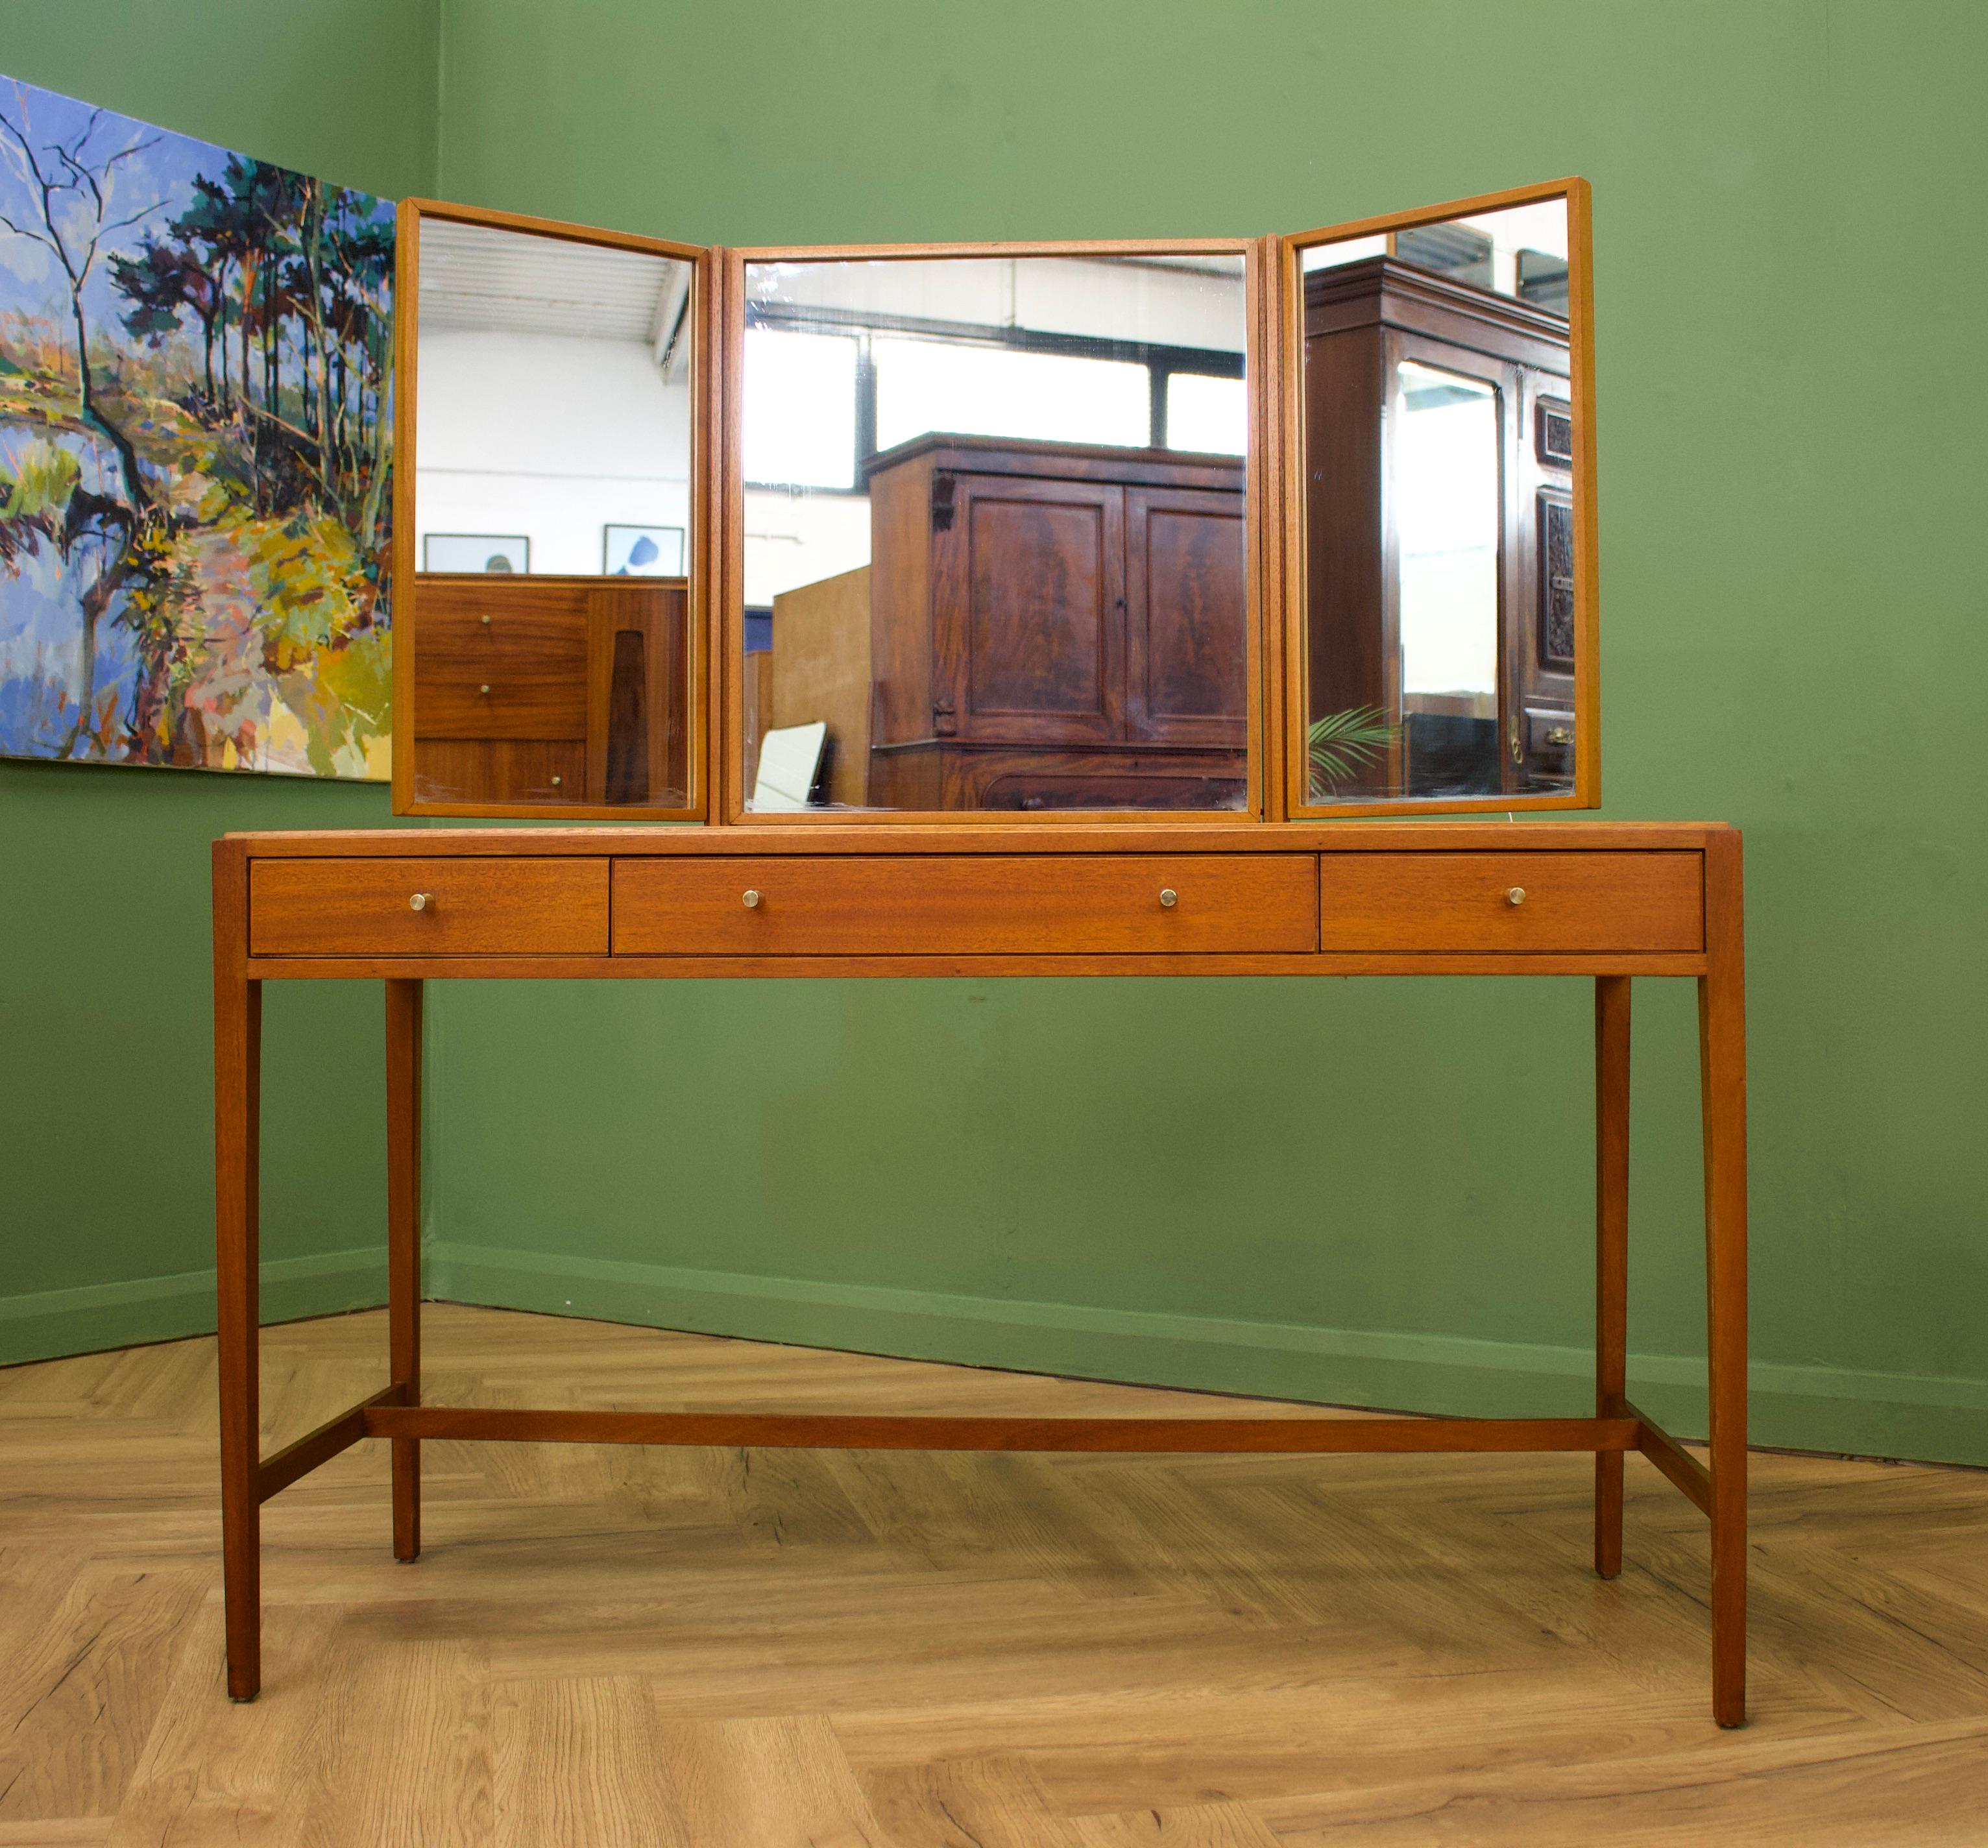 - midcentury dressing table.
- Manufactured in the UK by Loughborough
- Retailed through the department store Heals, during the 1960s
- Made from Teak & Teak Veneer.

- Featuring 3 drawers and a triptych mirror.